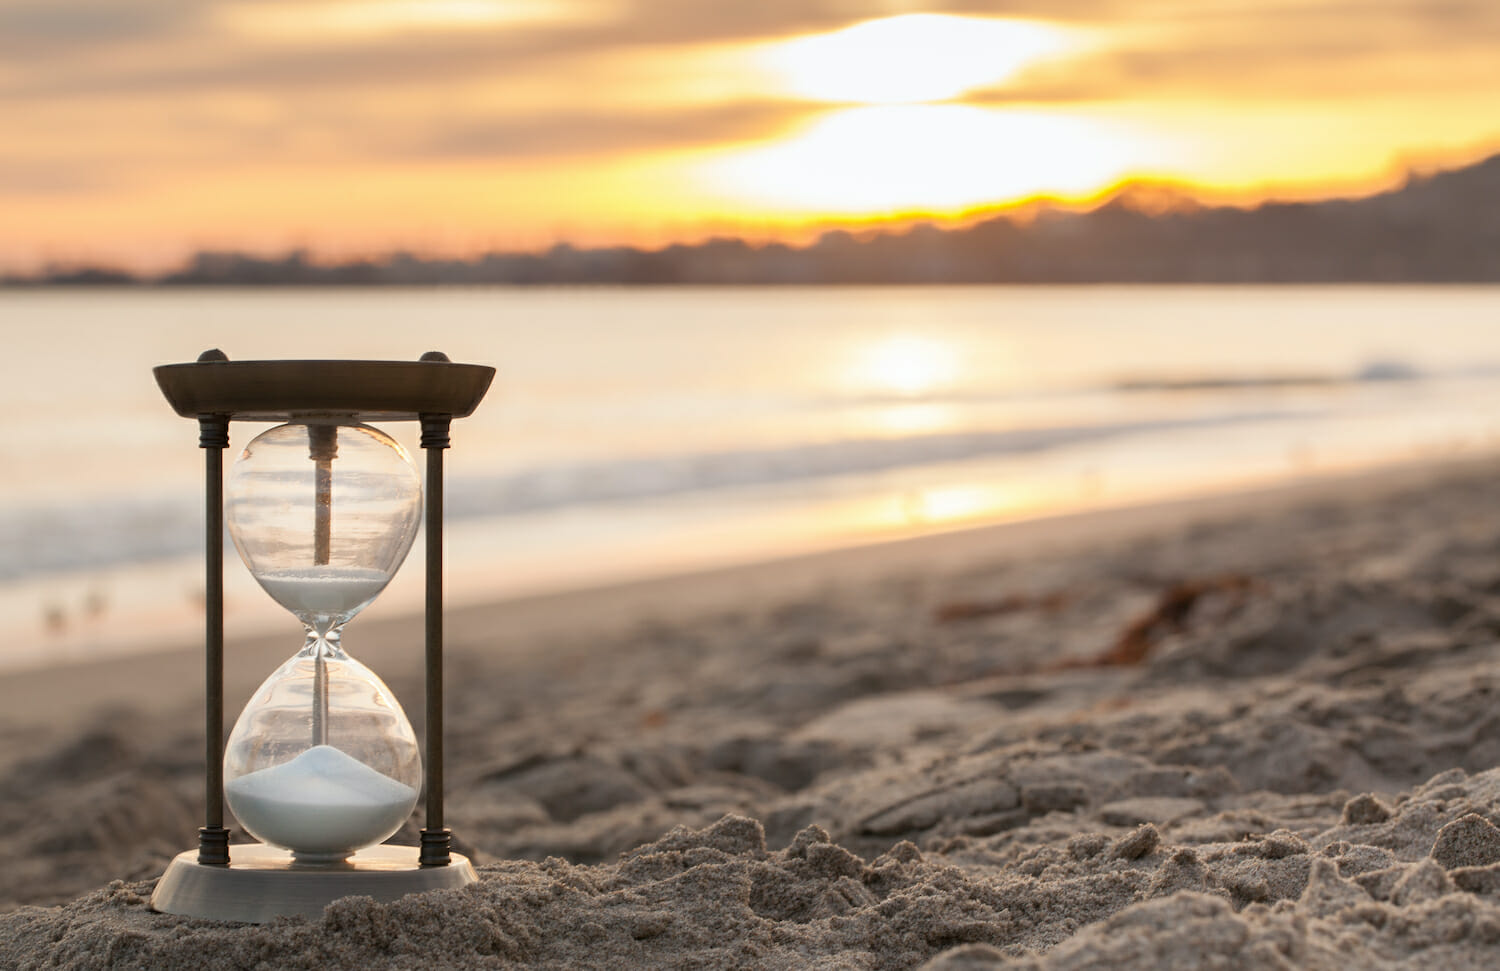 Hourglass on the beach at sunset - What goals should I set for 2021?